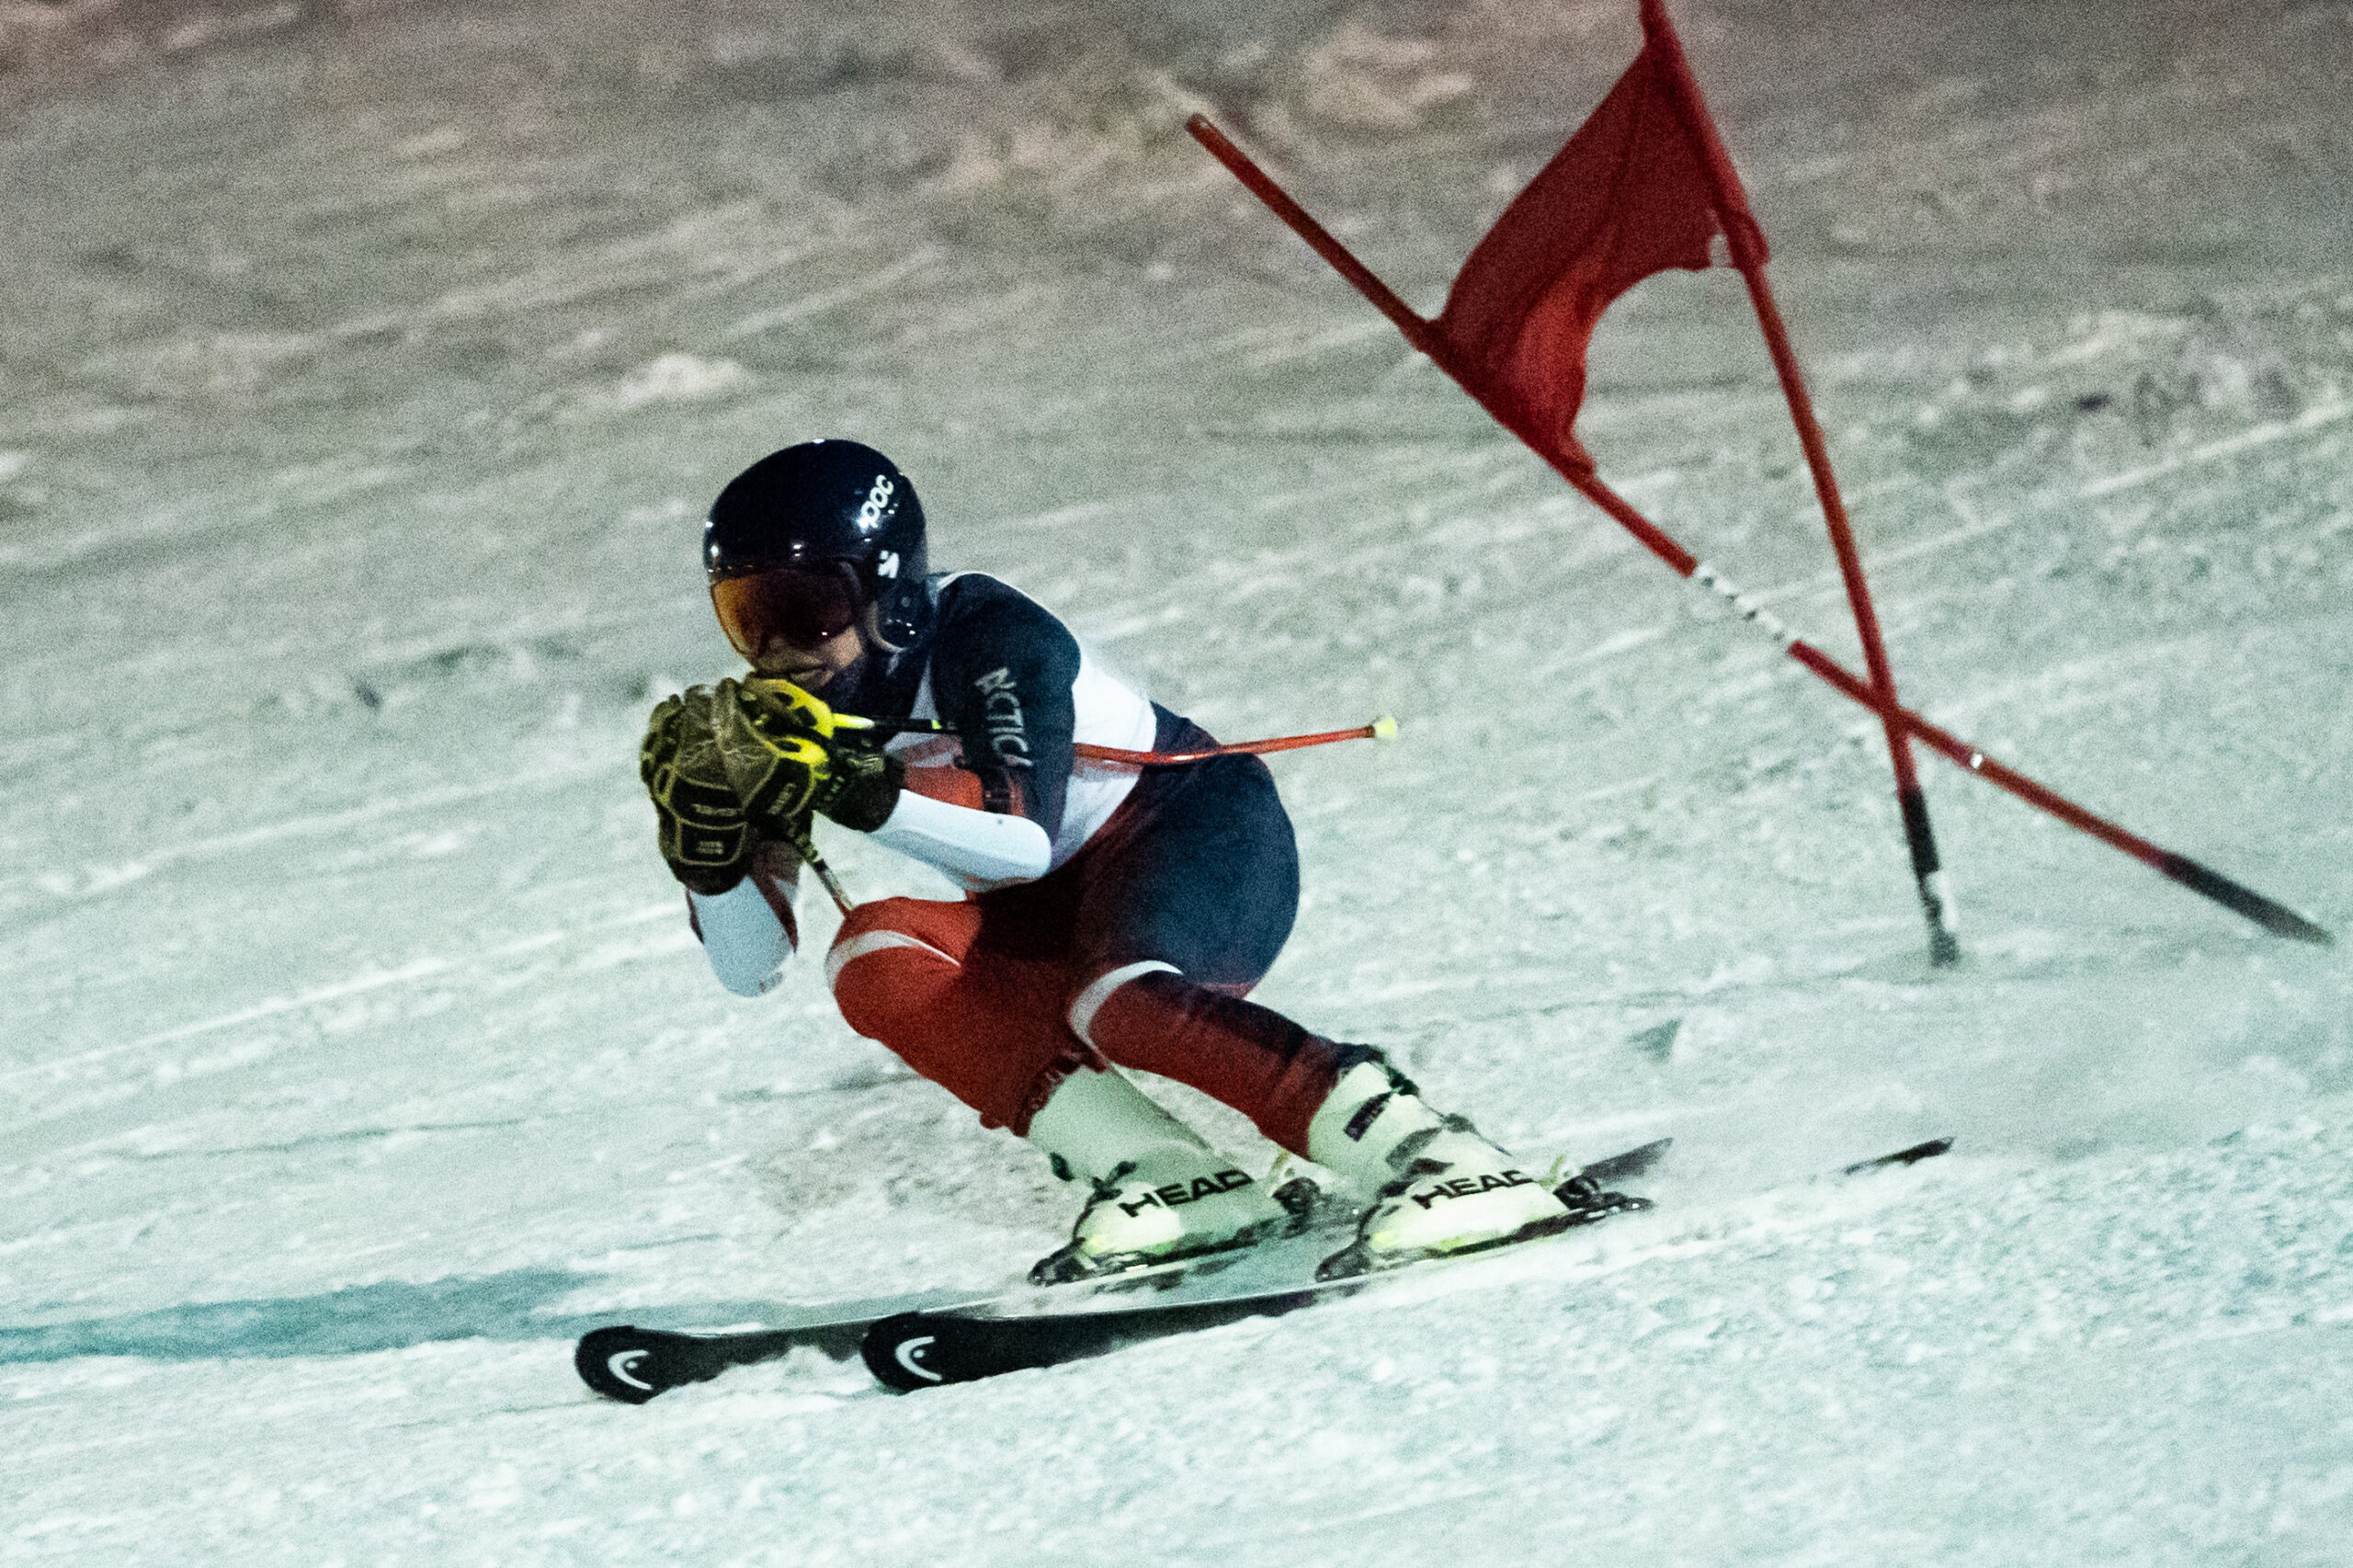 HHS sports roundup: Ski teams close out season in style